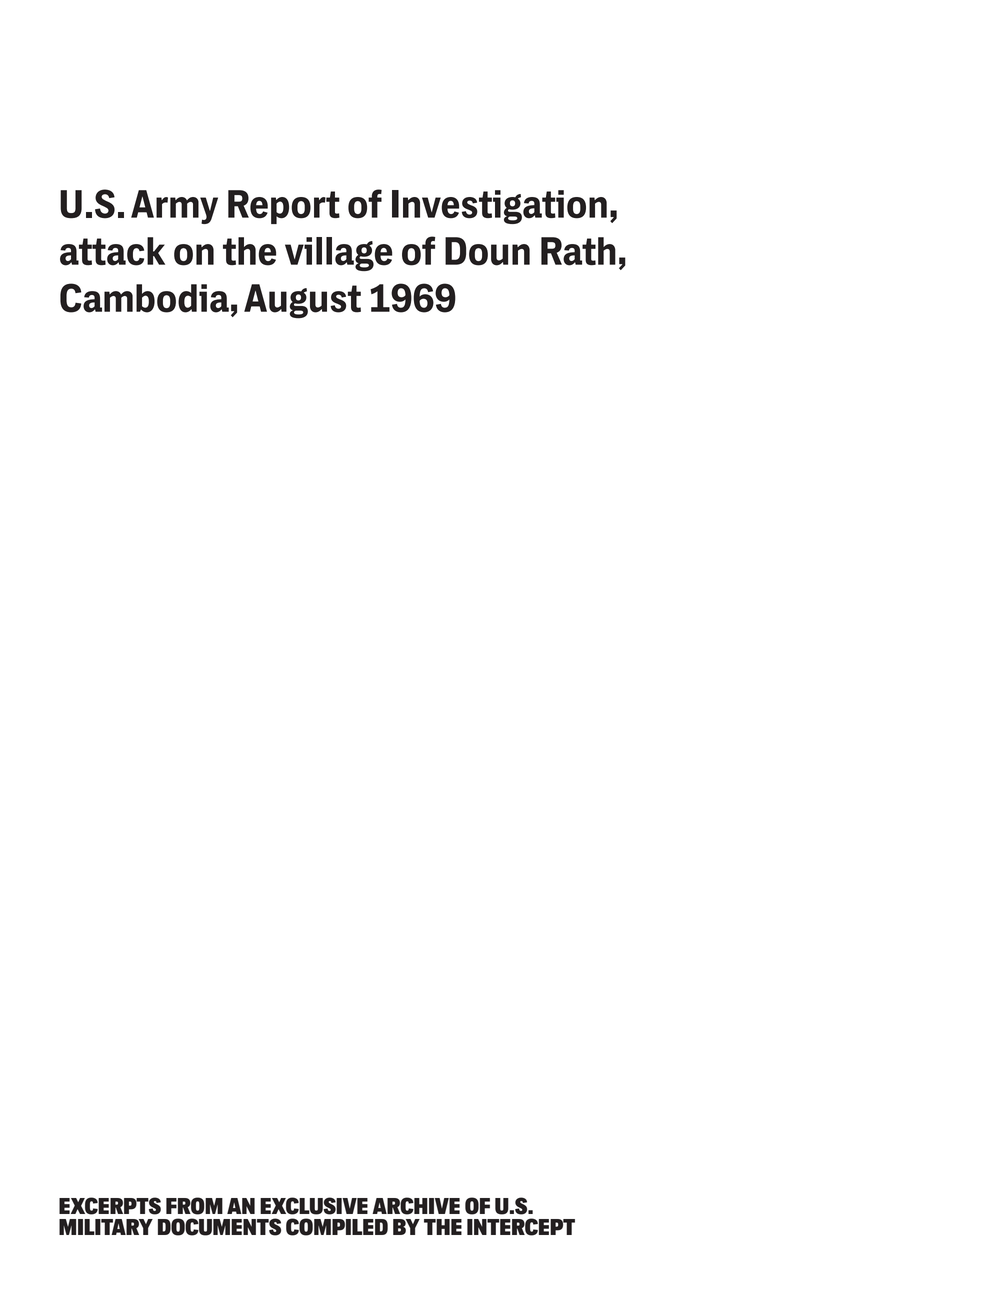 Page 8 from Excerpts-From-An-Exclusive-Archive-Of-US-Military-Documents-Compiled-by-The Intercept